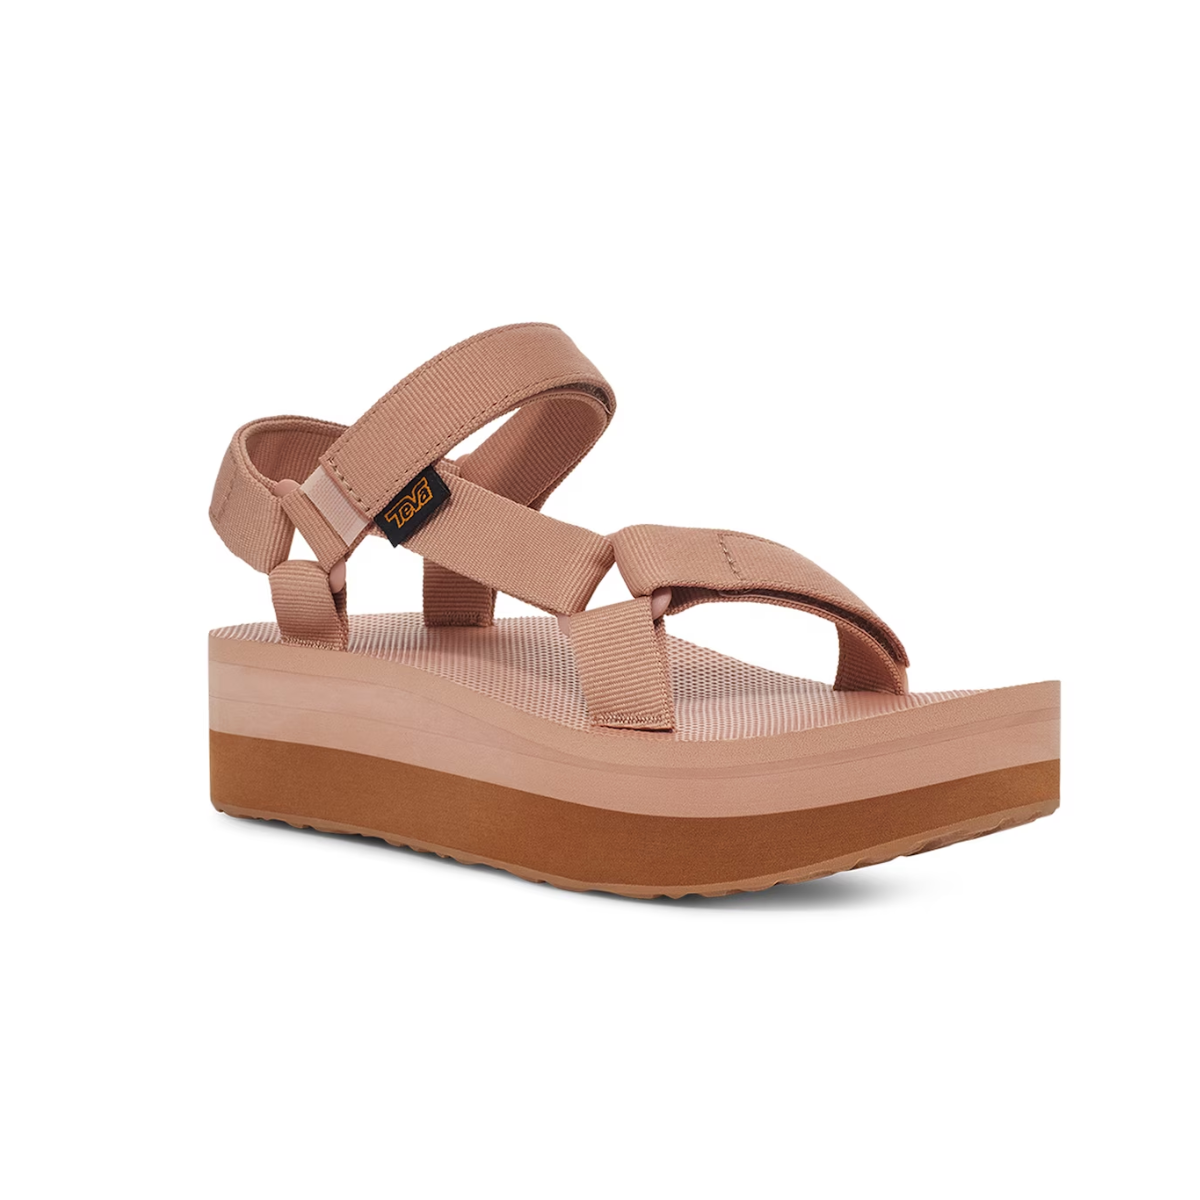 A single brown Flatform Universal sandal with adjustable straps made from REPREVE® recycled polyester webbing on a white background by Teva Sandal.